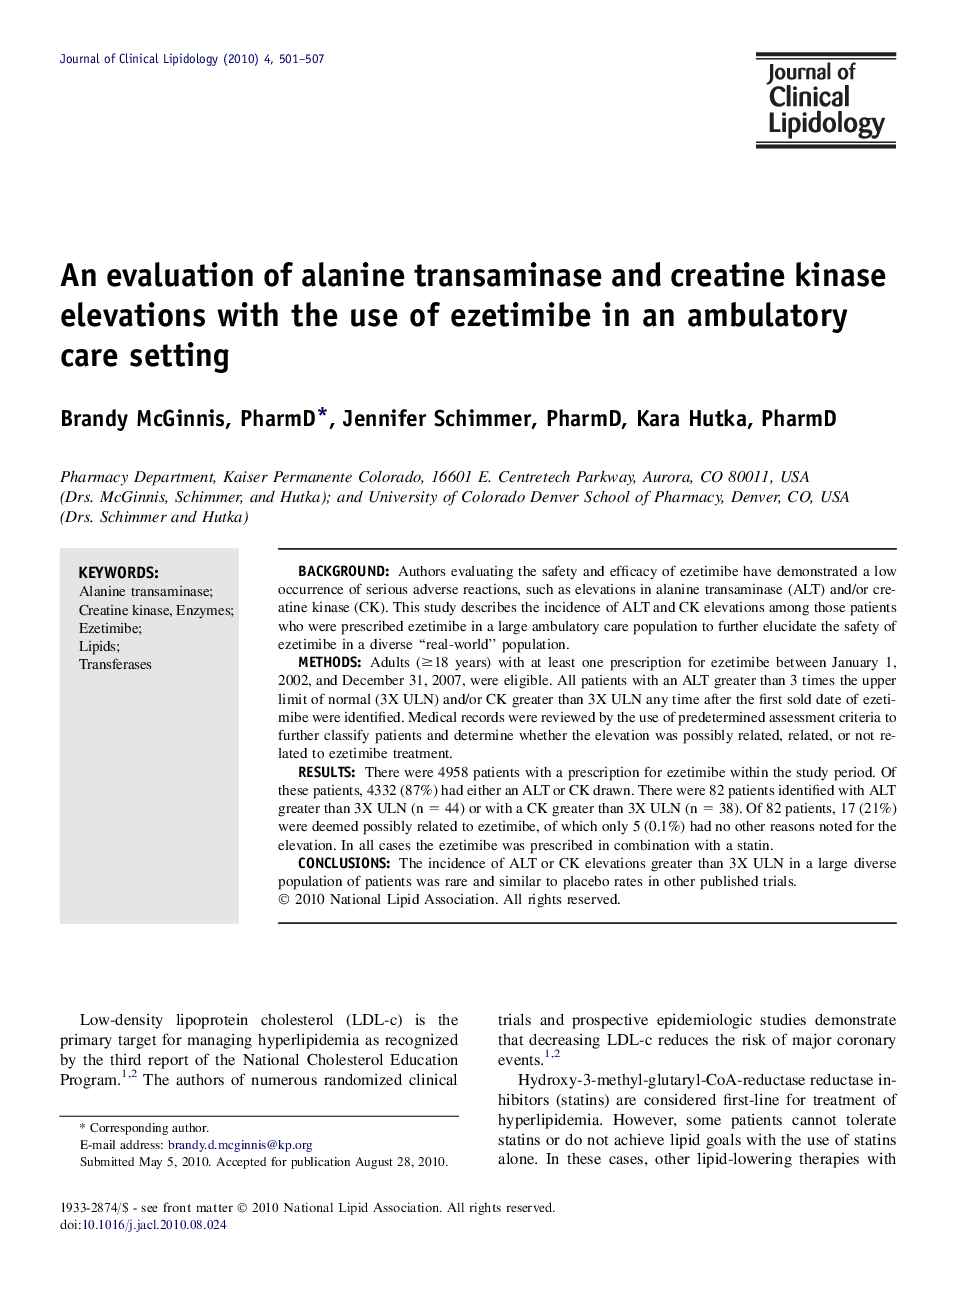 An evaluation of alanine transaminase and creatine kinase elevations with the use of ezetimibe in an ambulatory care setting